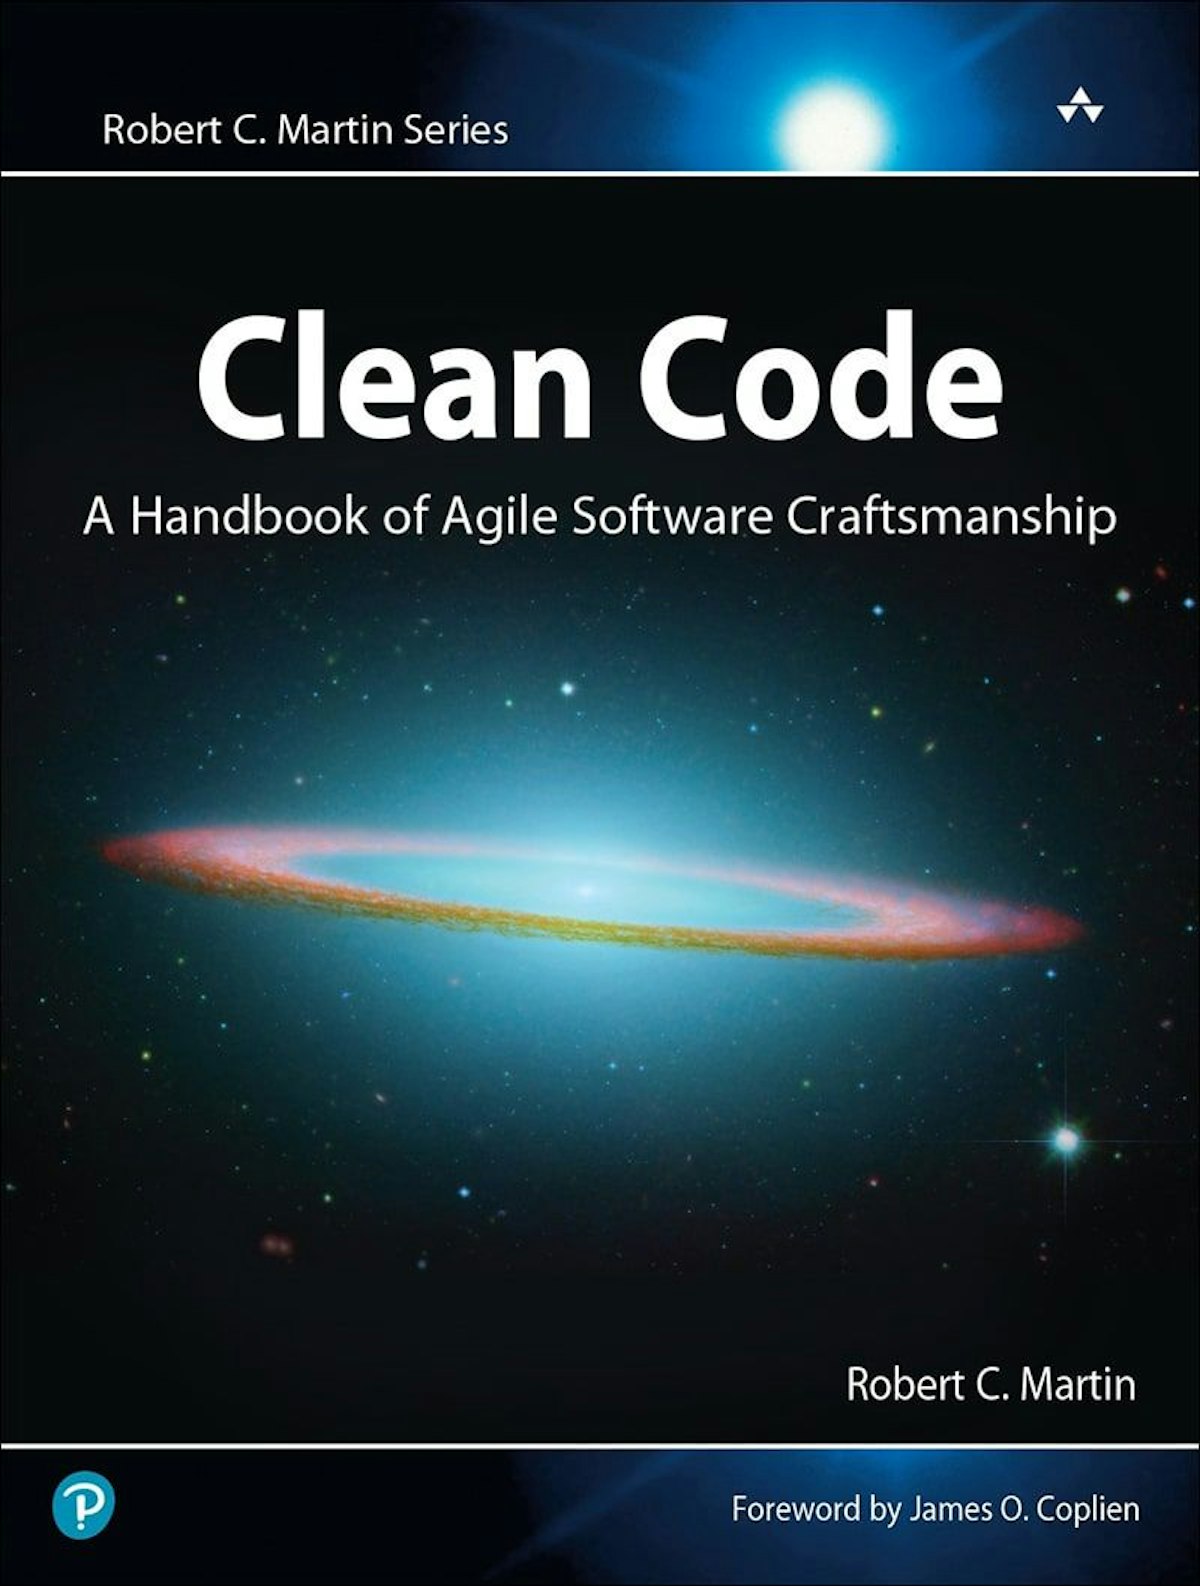 featured image - 100 Pieces of Programming Advice from the Book Clean Code by Robert Martin